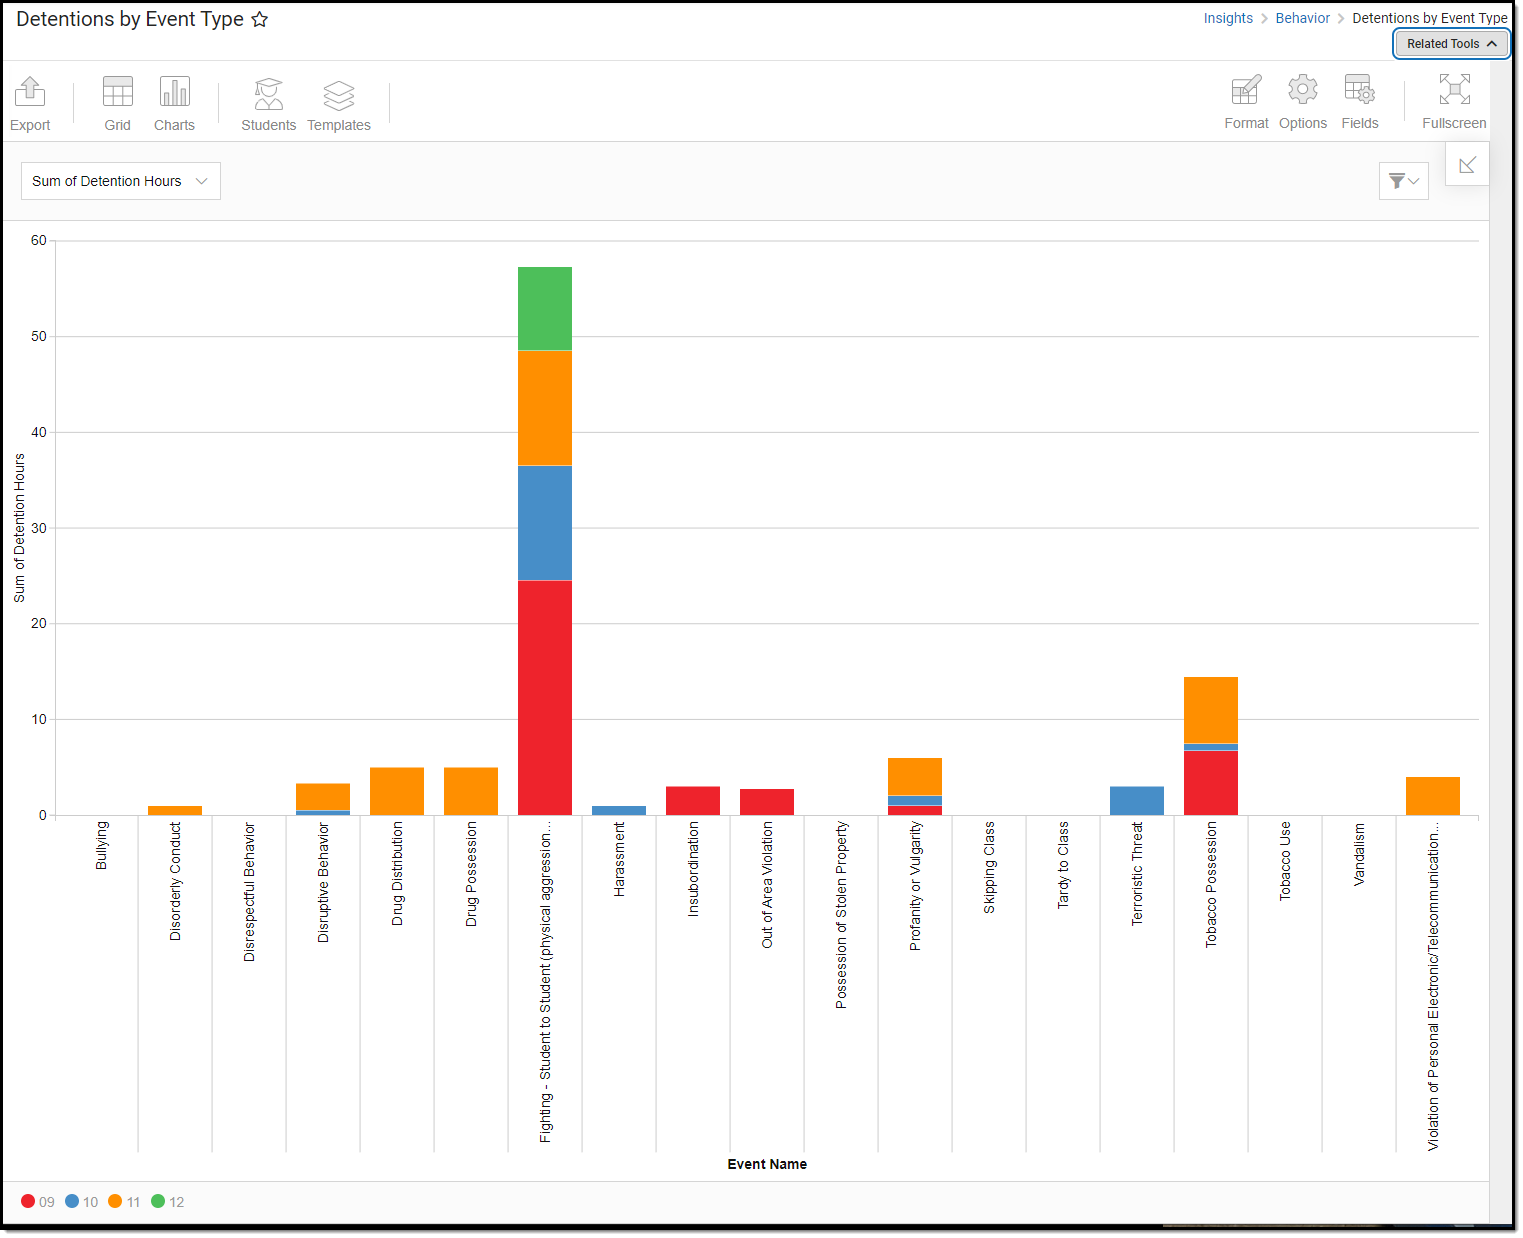 screenshot of the detentions by event type visualization